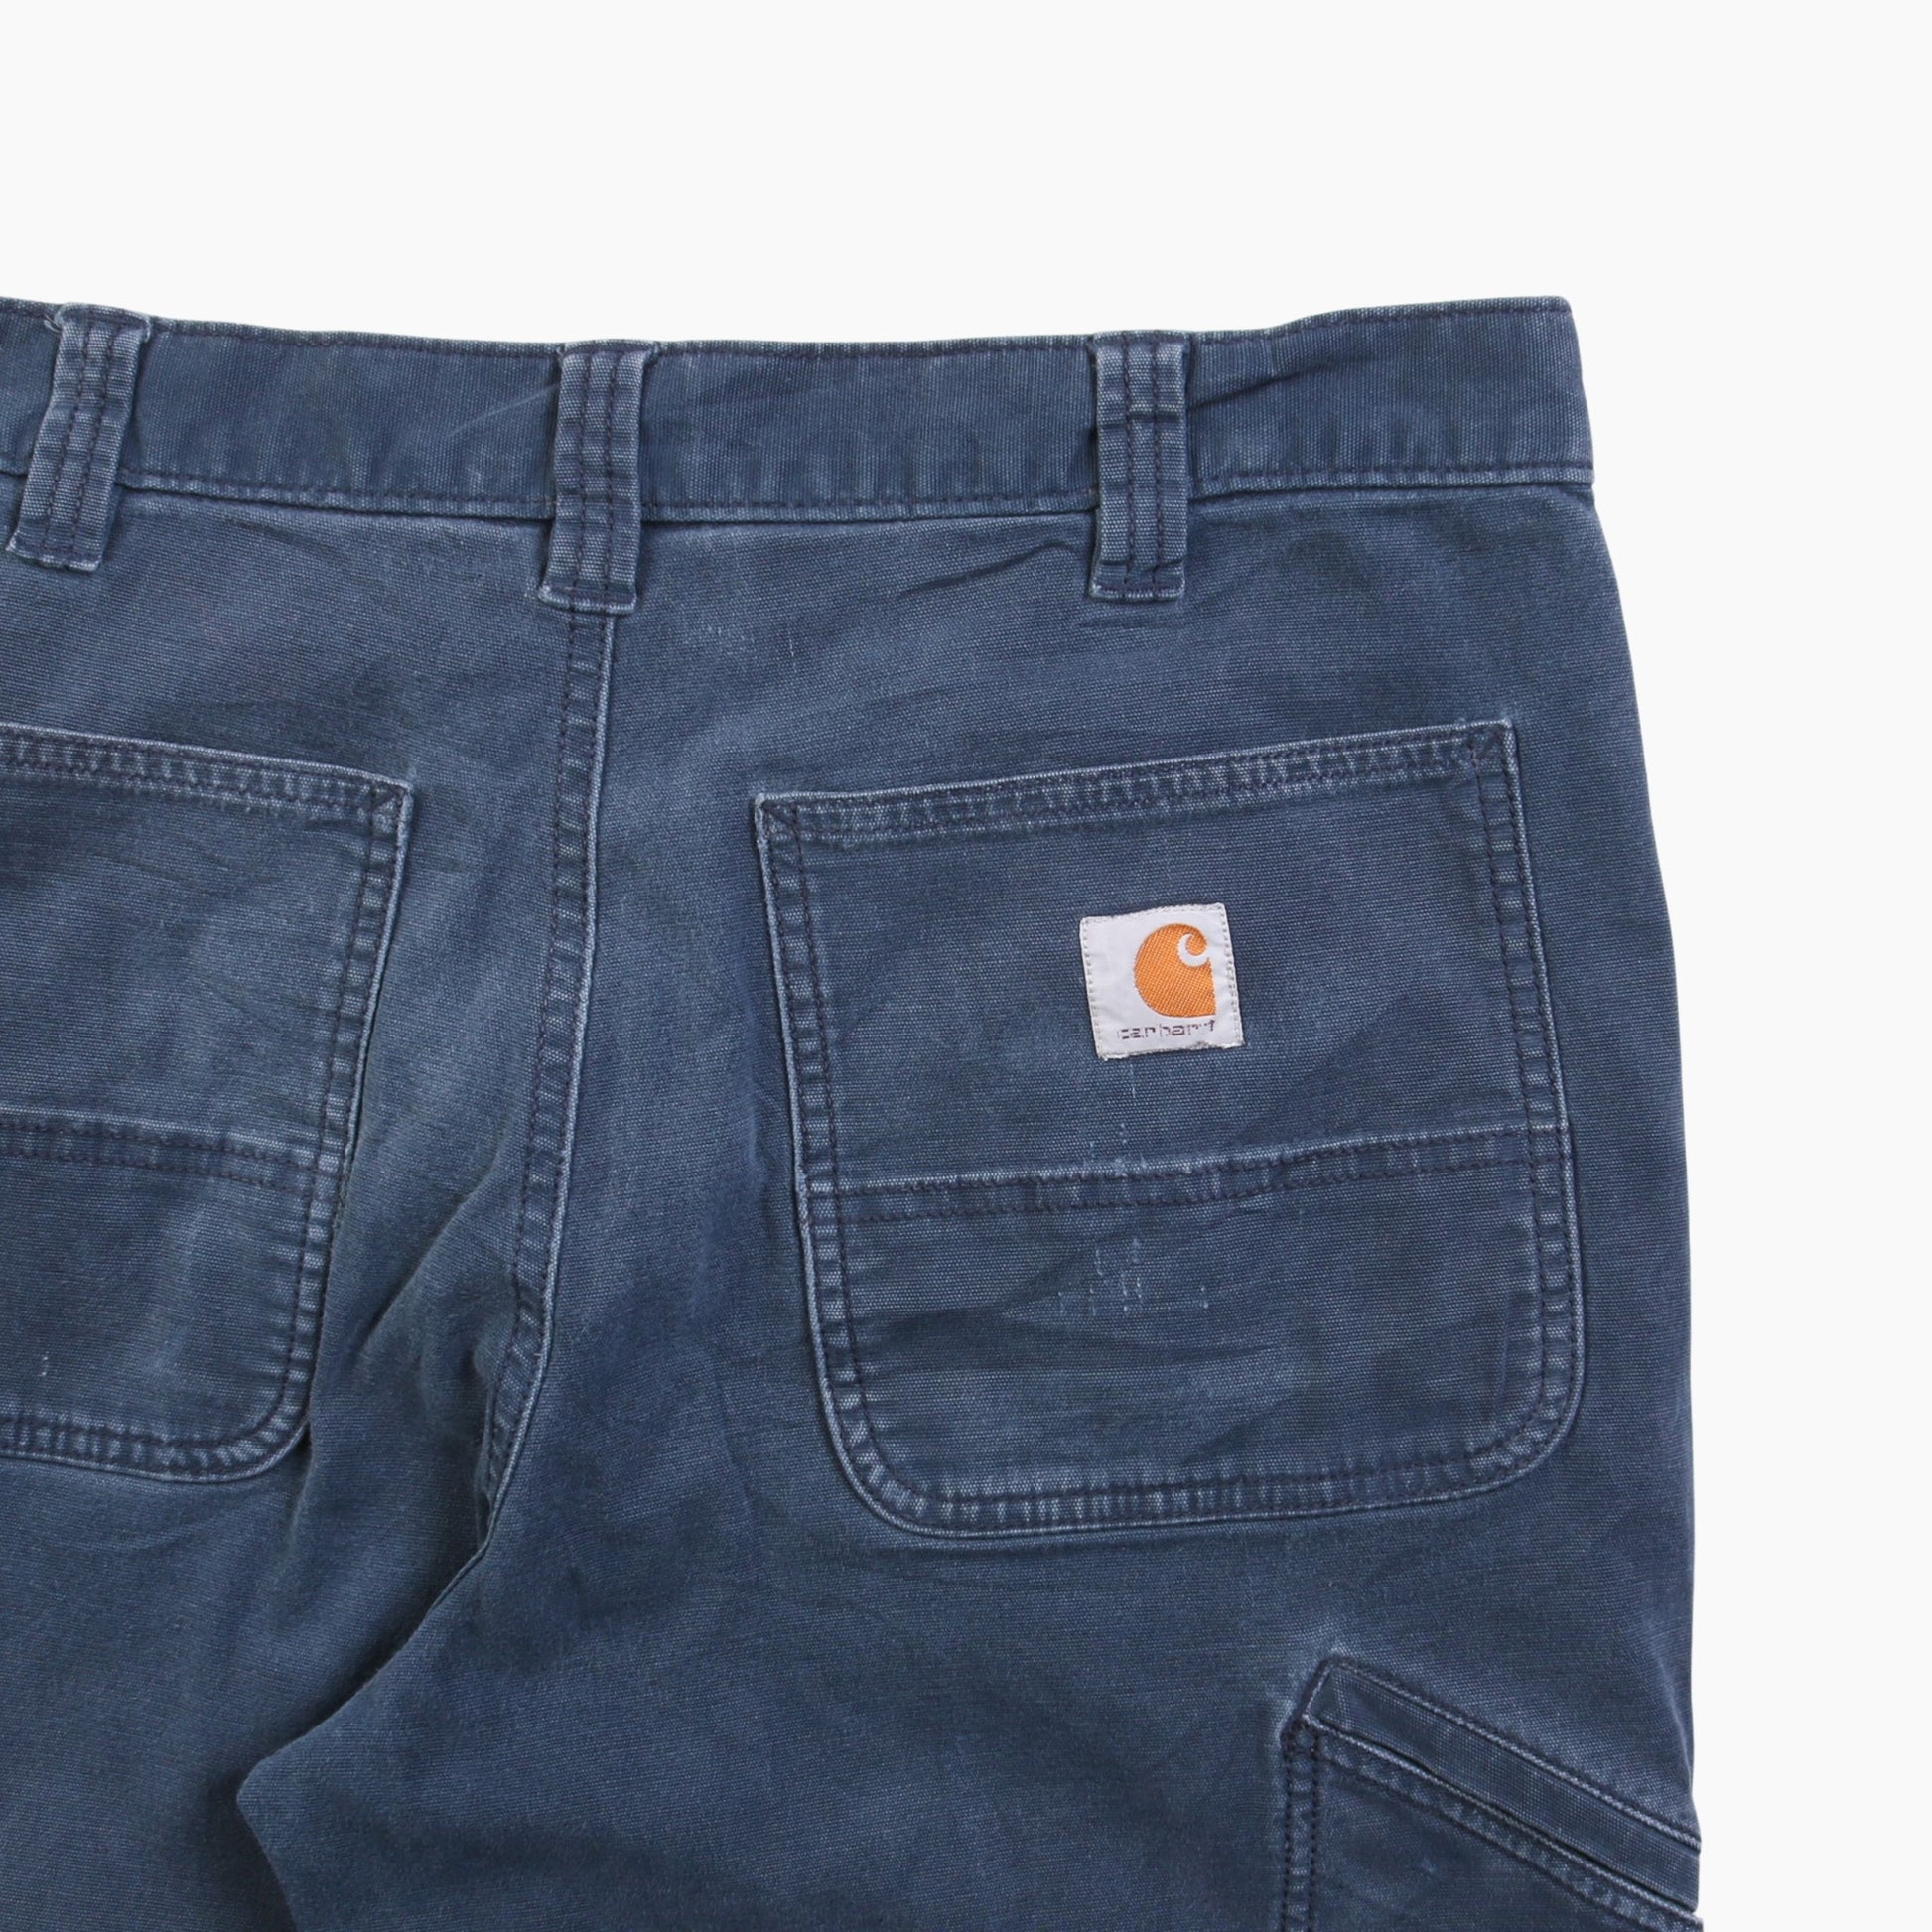 Vintage Carpenter Pants - Washed Navy - 34/34 - American Madness